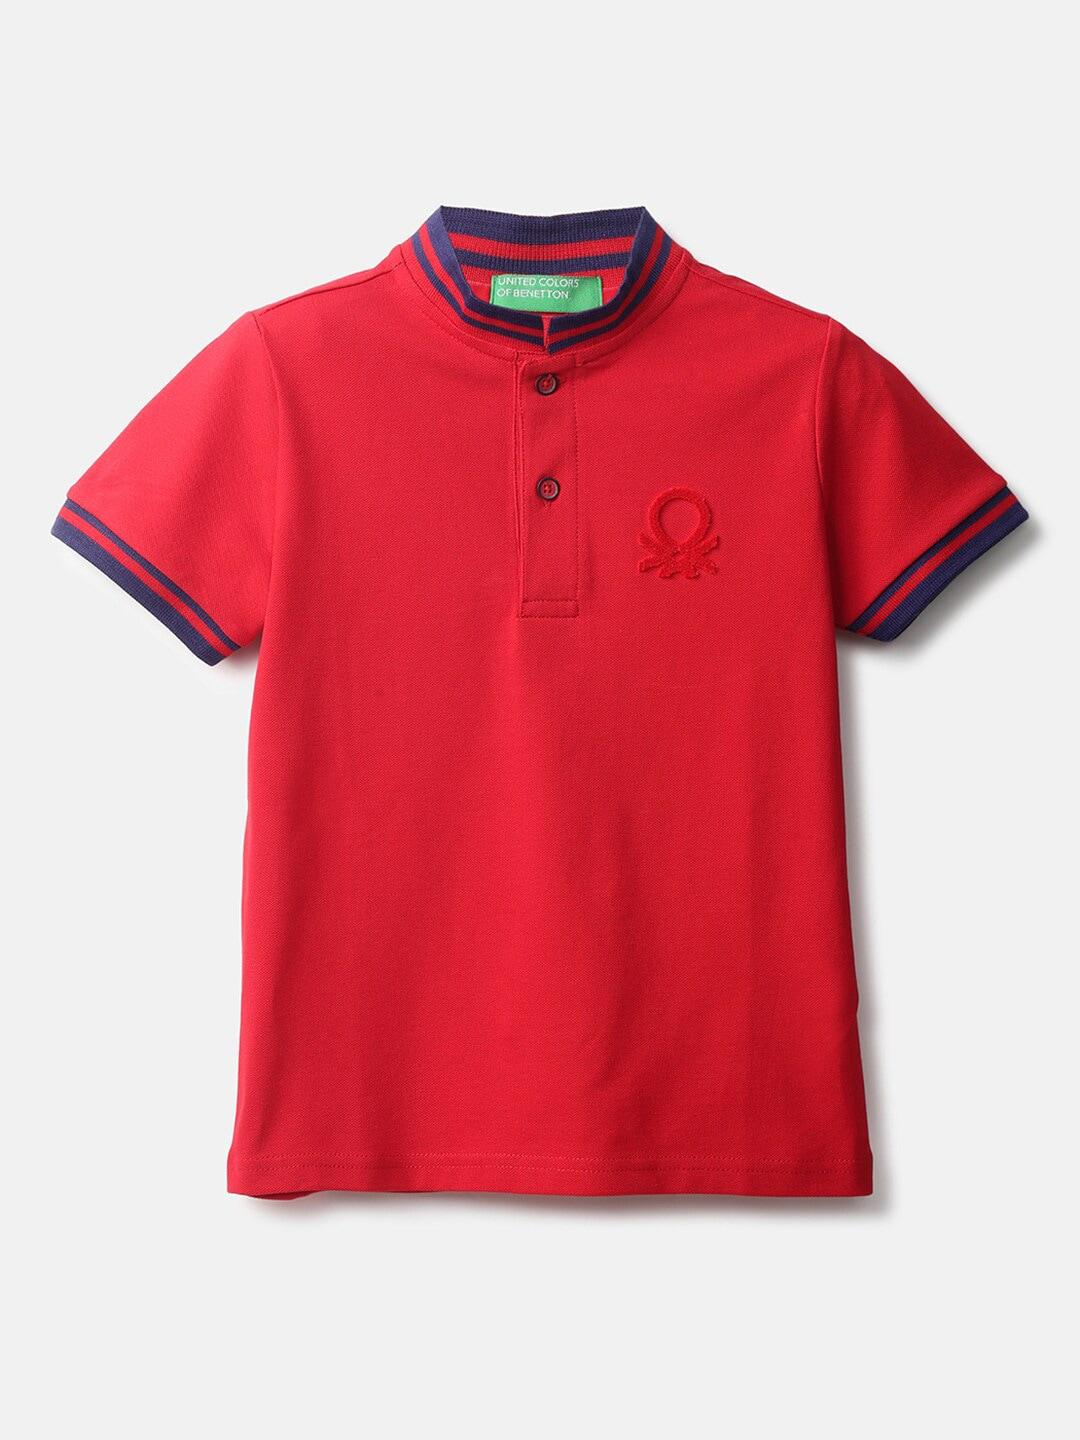 United Colors of Benetton Boys Red & Blue Henley Neck T-shirt